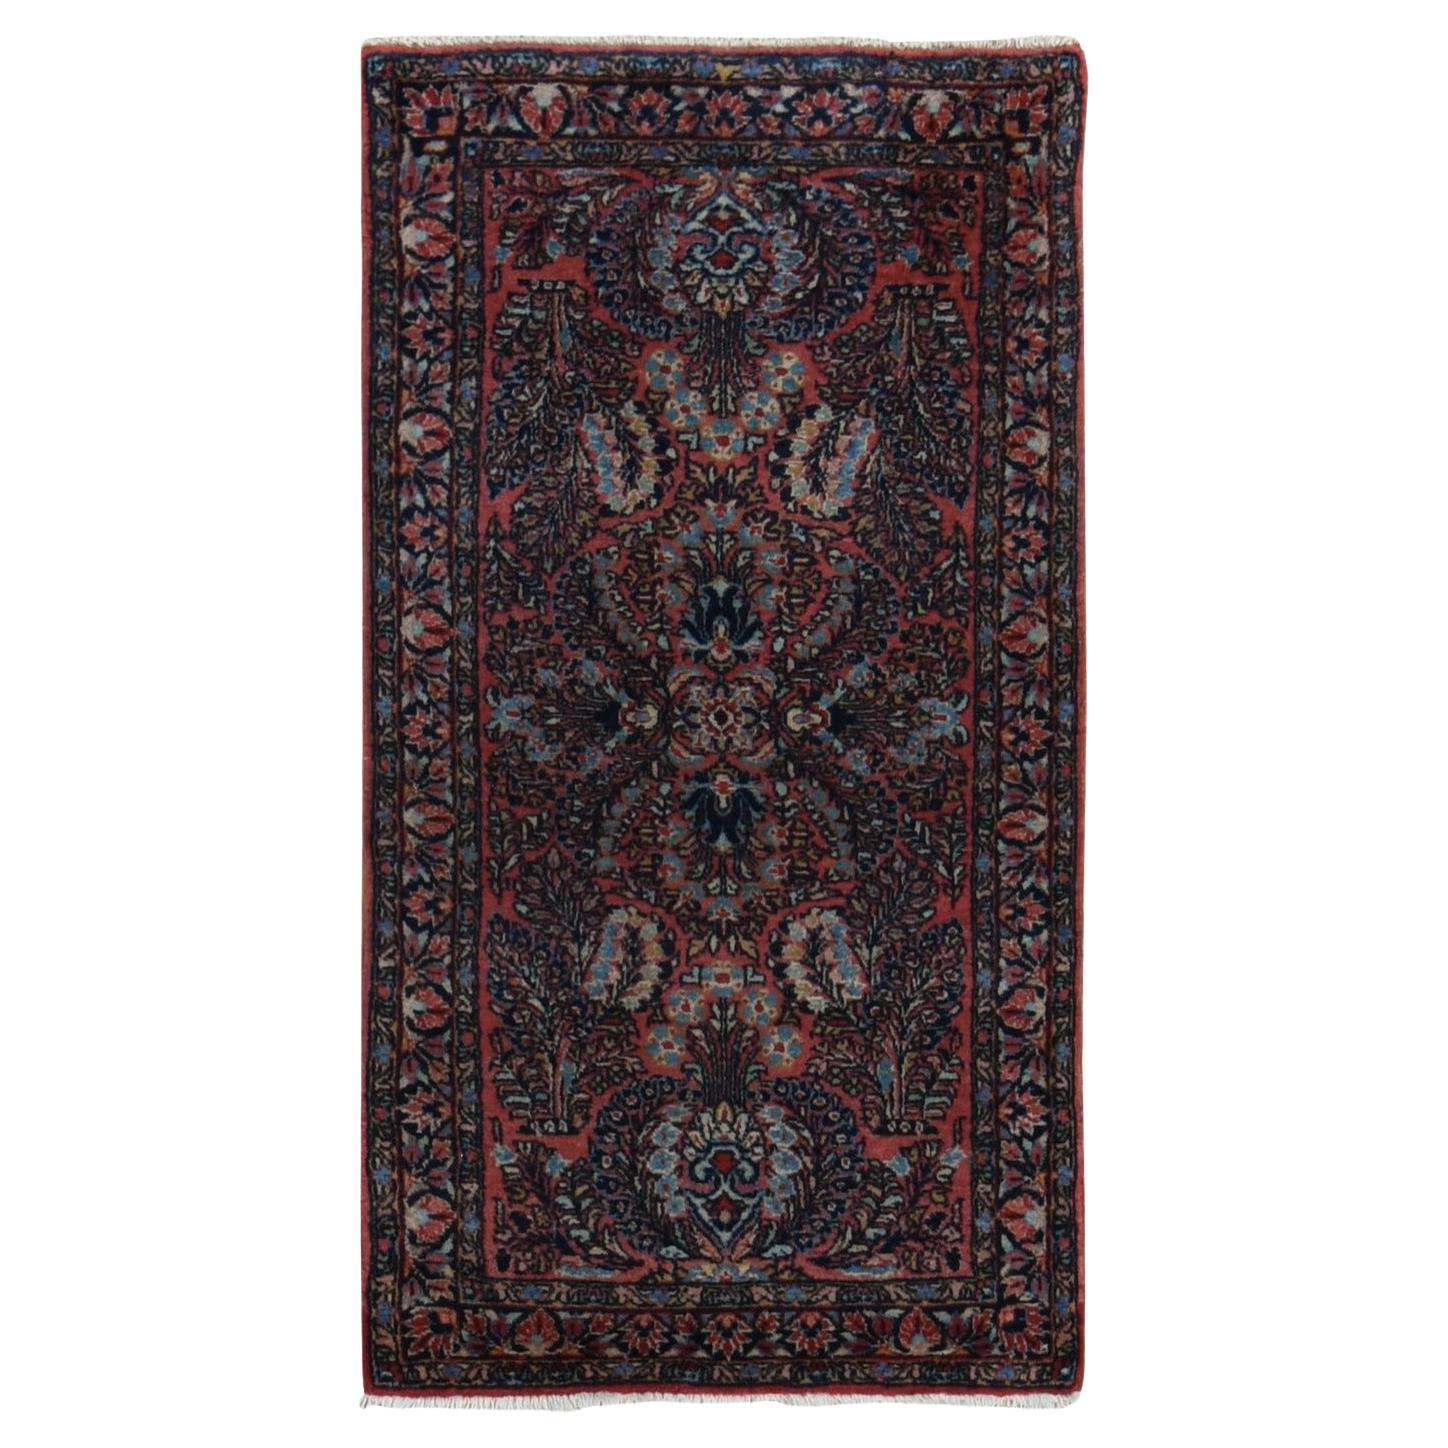 Red Antique Persian Sarouk Full Pile Clean and Soft Hand Knotted Mat Rug 2'1"x4'